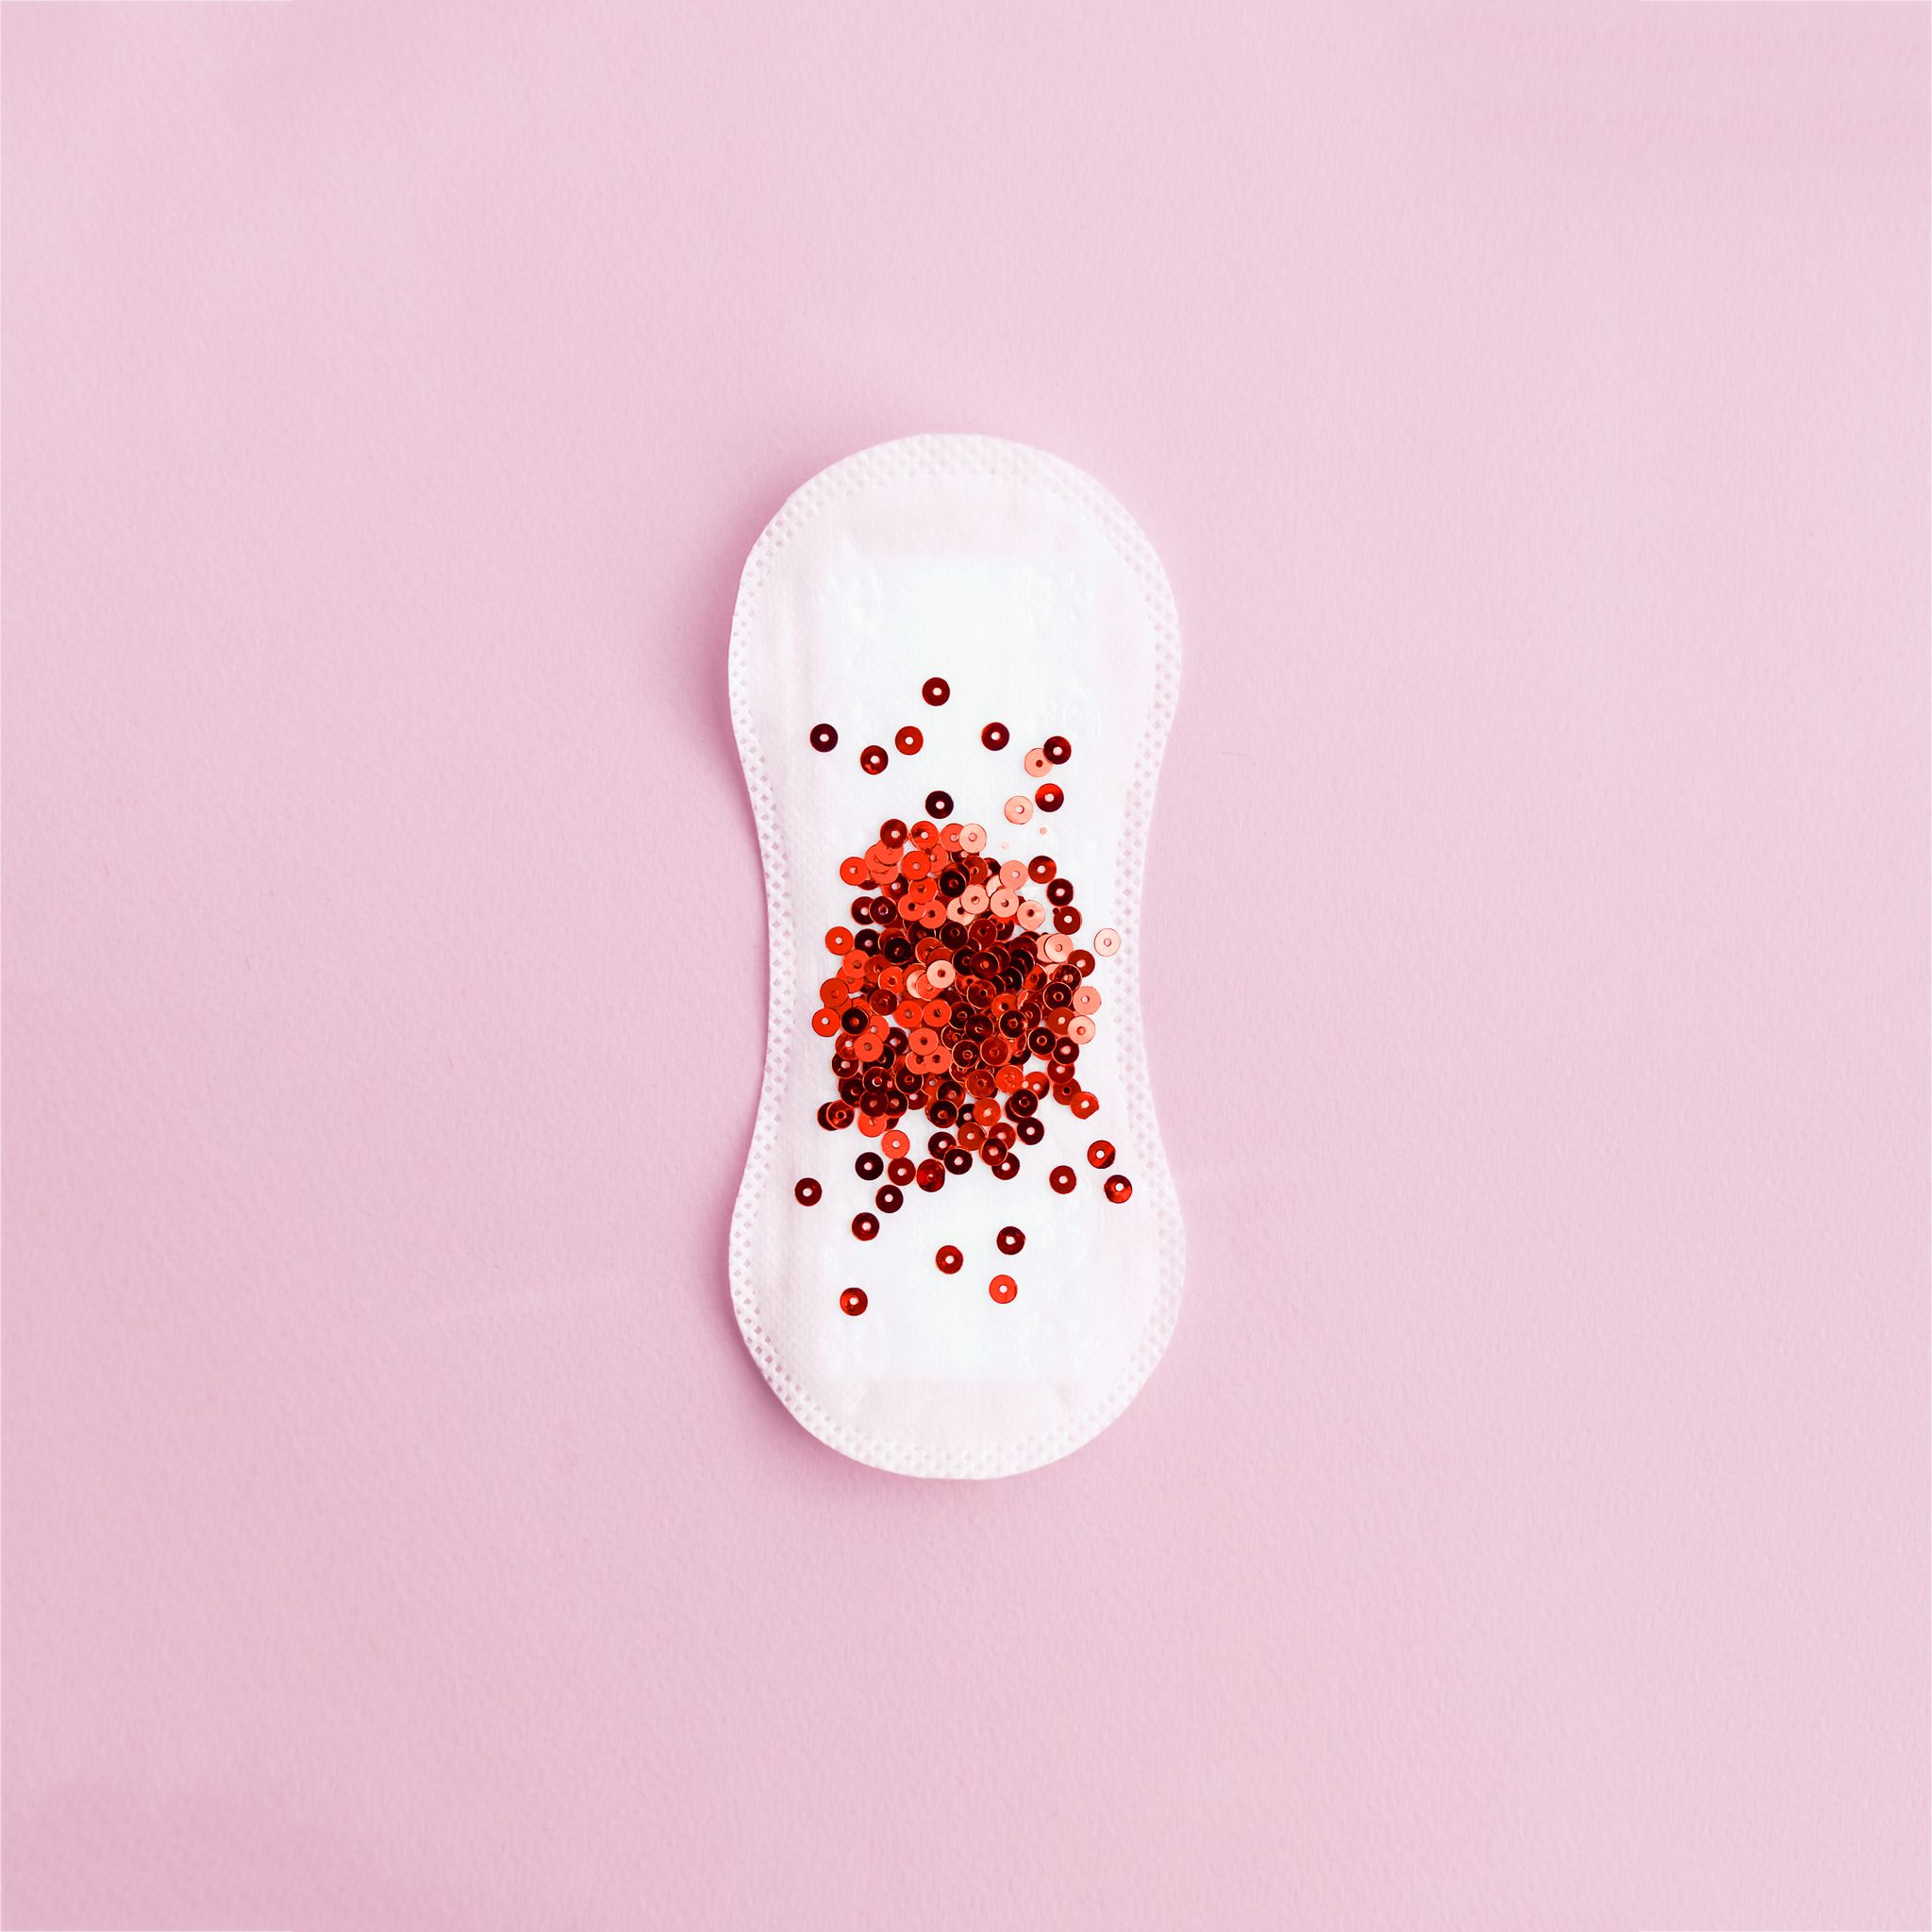 menstrual pad with red glitter on pastel background